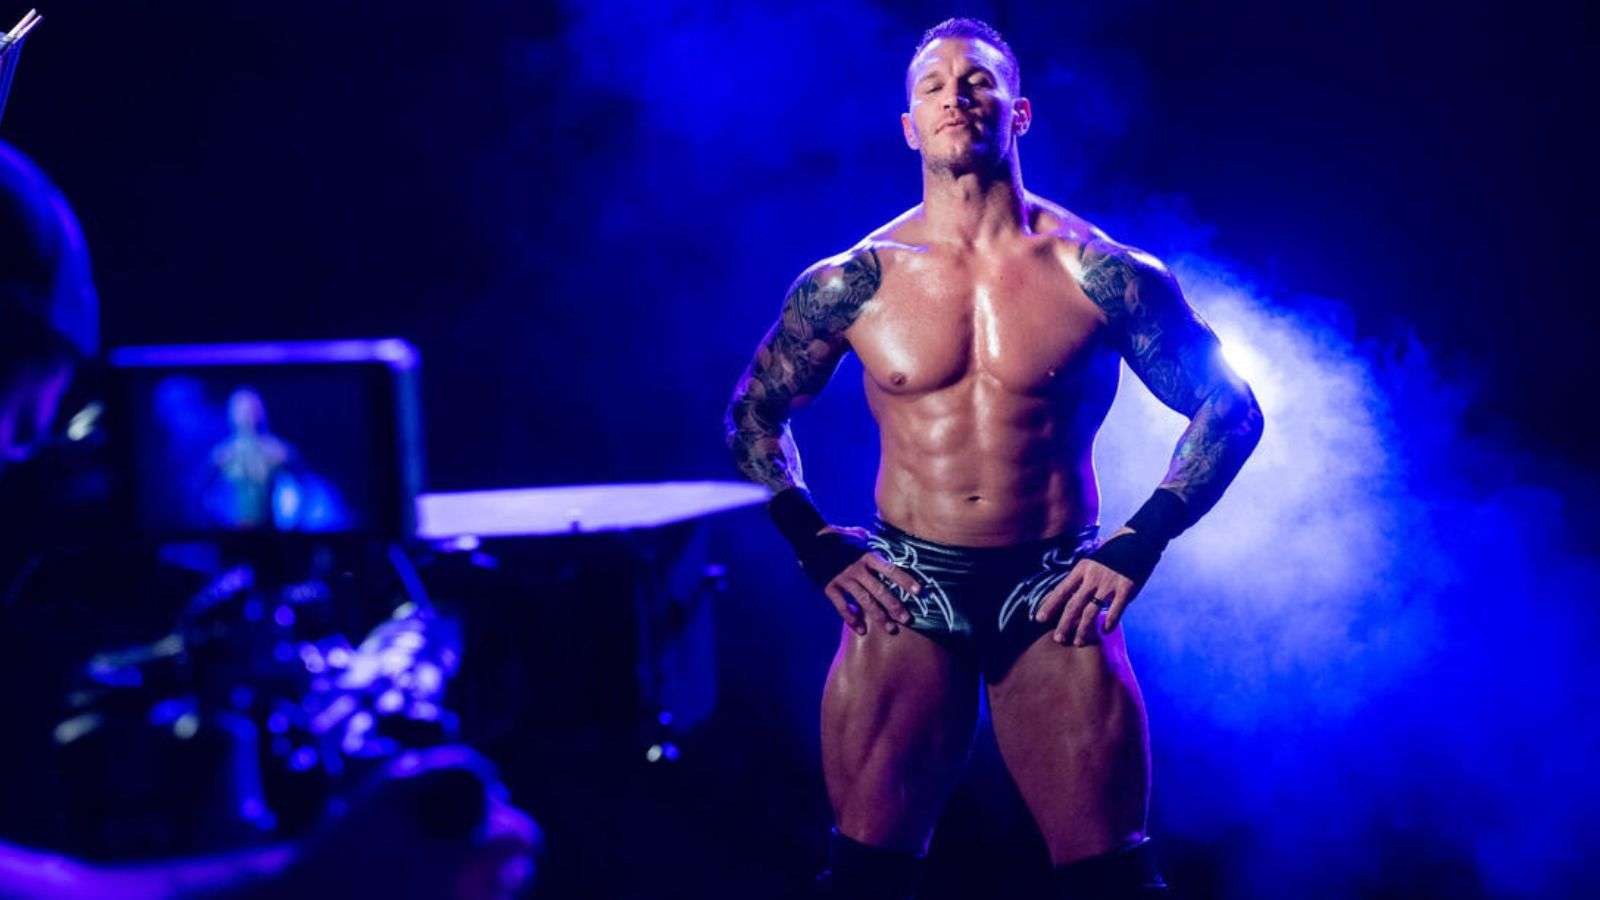 Randy Orton as a member of the WWE.